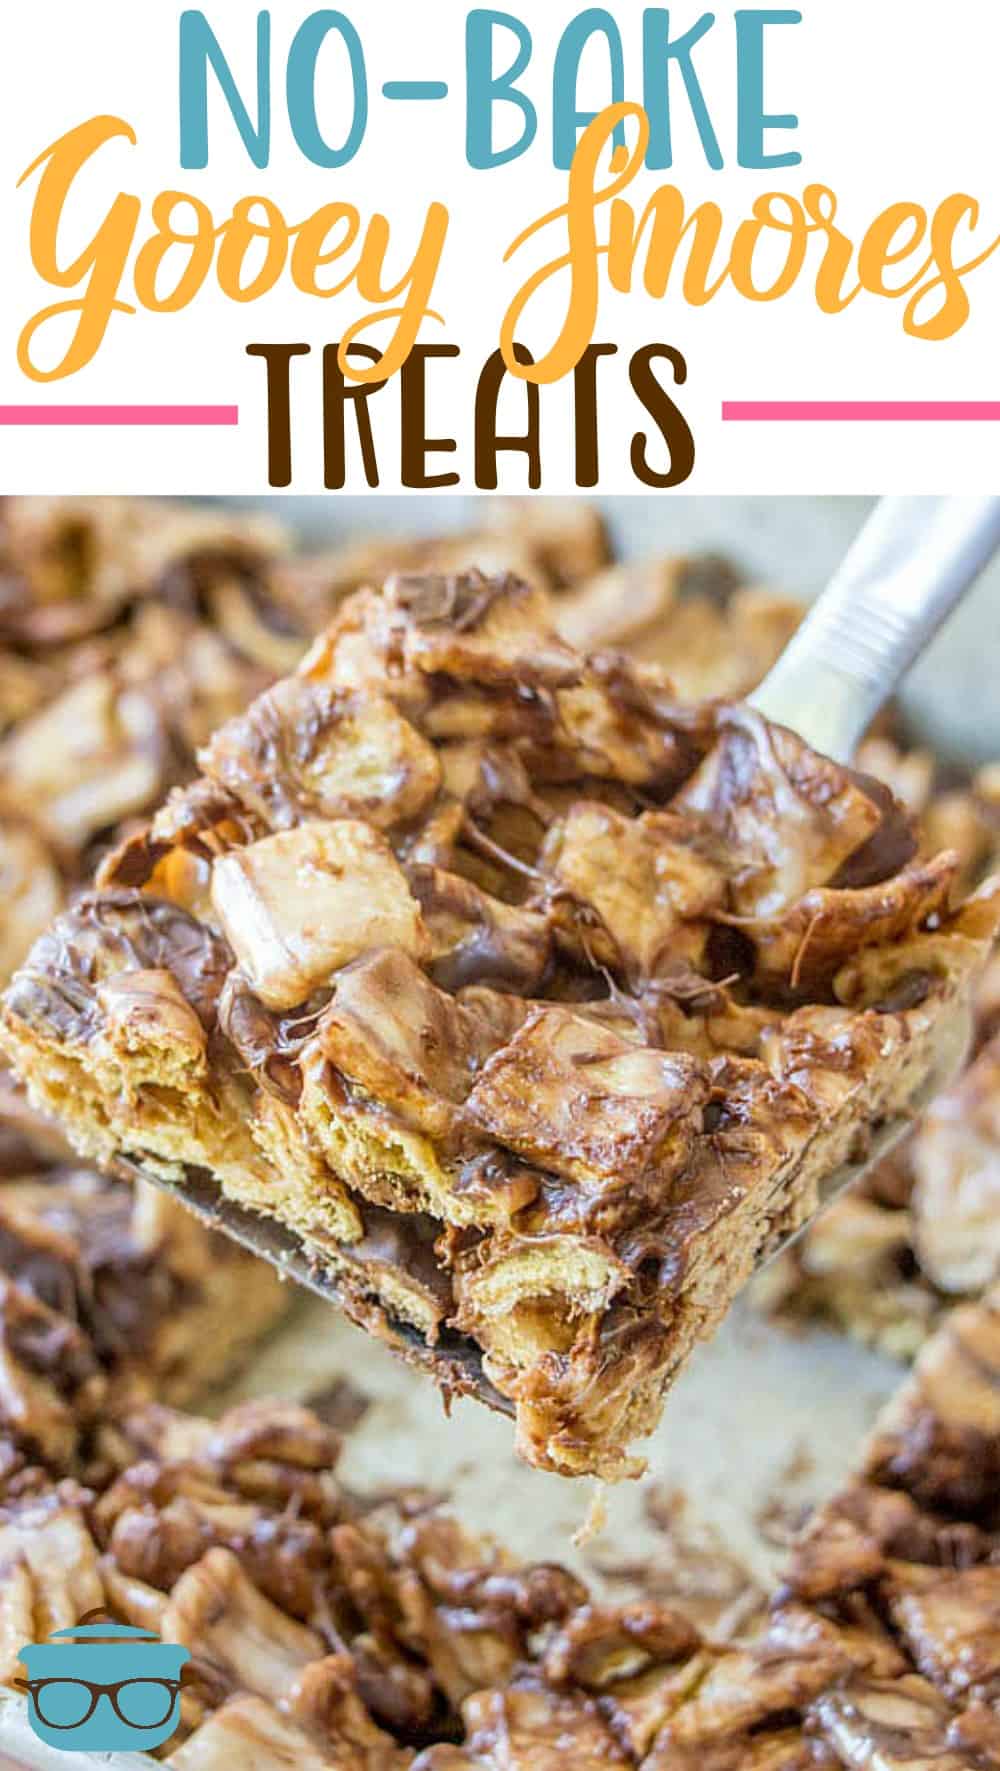 No-Bake Gooey S'mores Treats recipe from The Country Cook